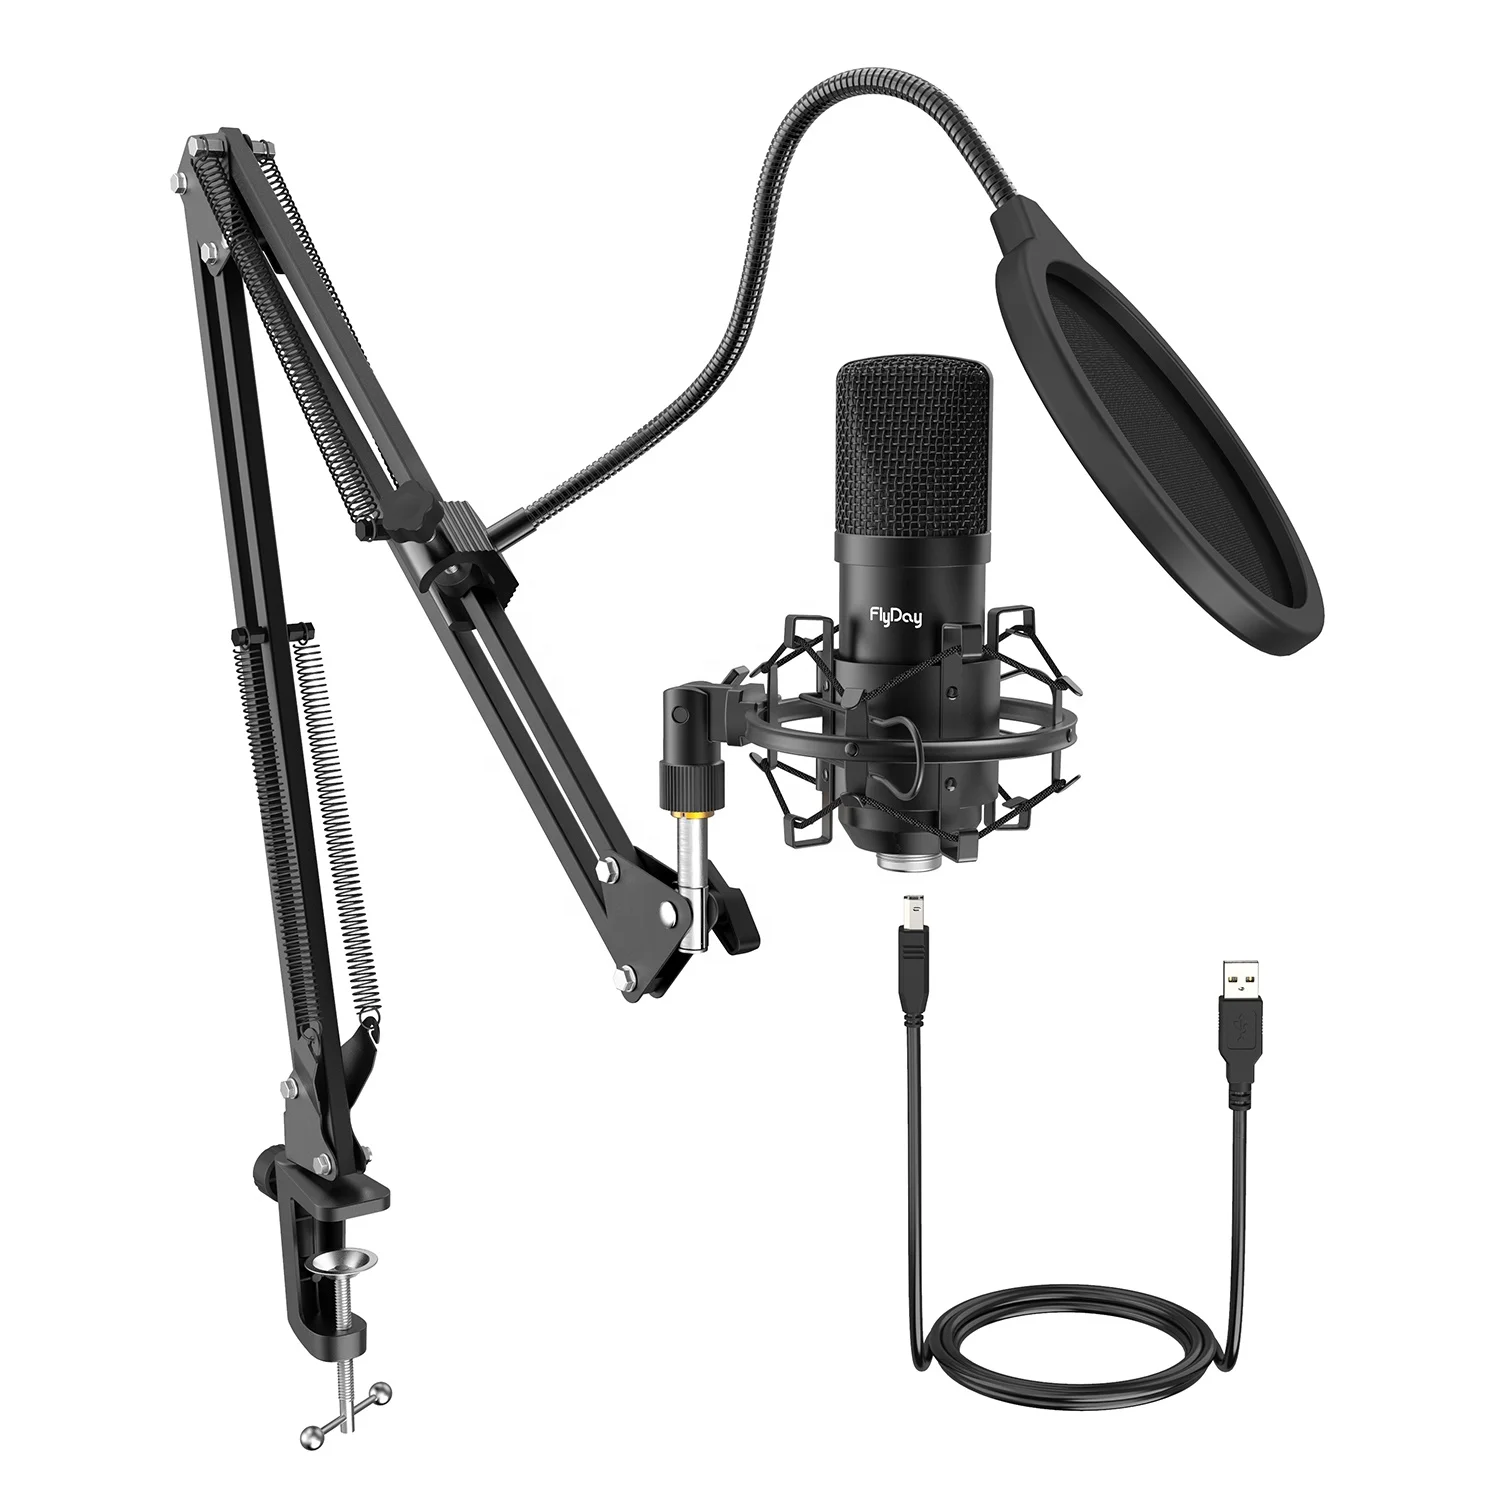 

Flyday T730 USB Condenser Gaming Mic, Podcasting Recording Studio Podcast Microphone Kit Windows Mac OS Applicable